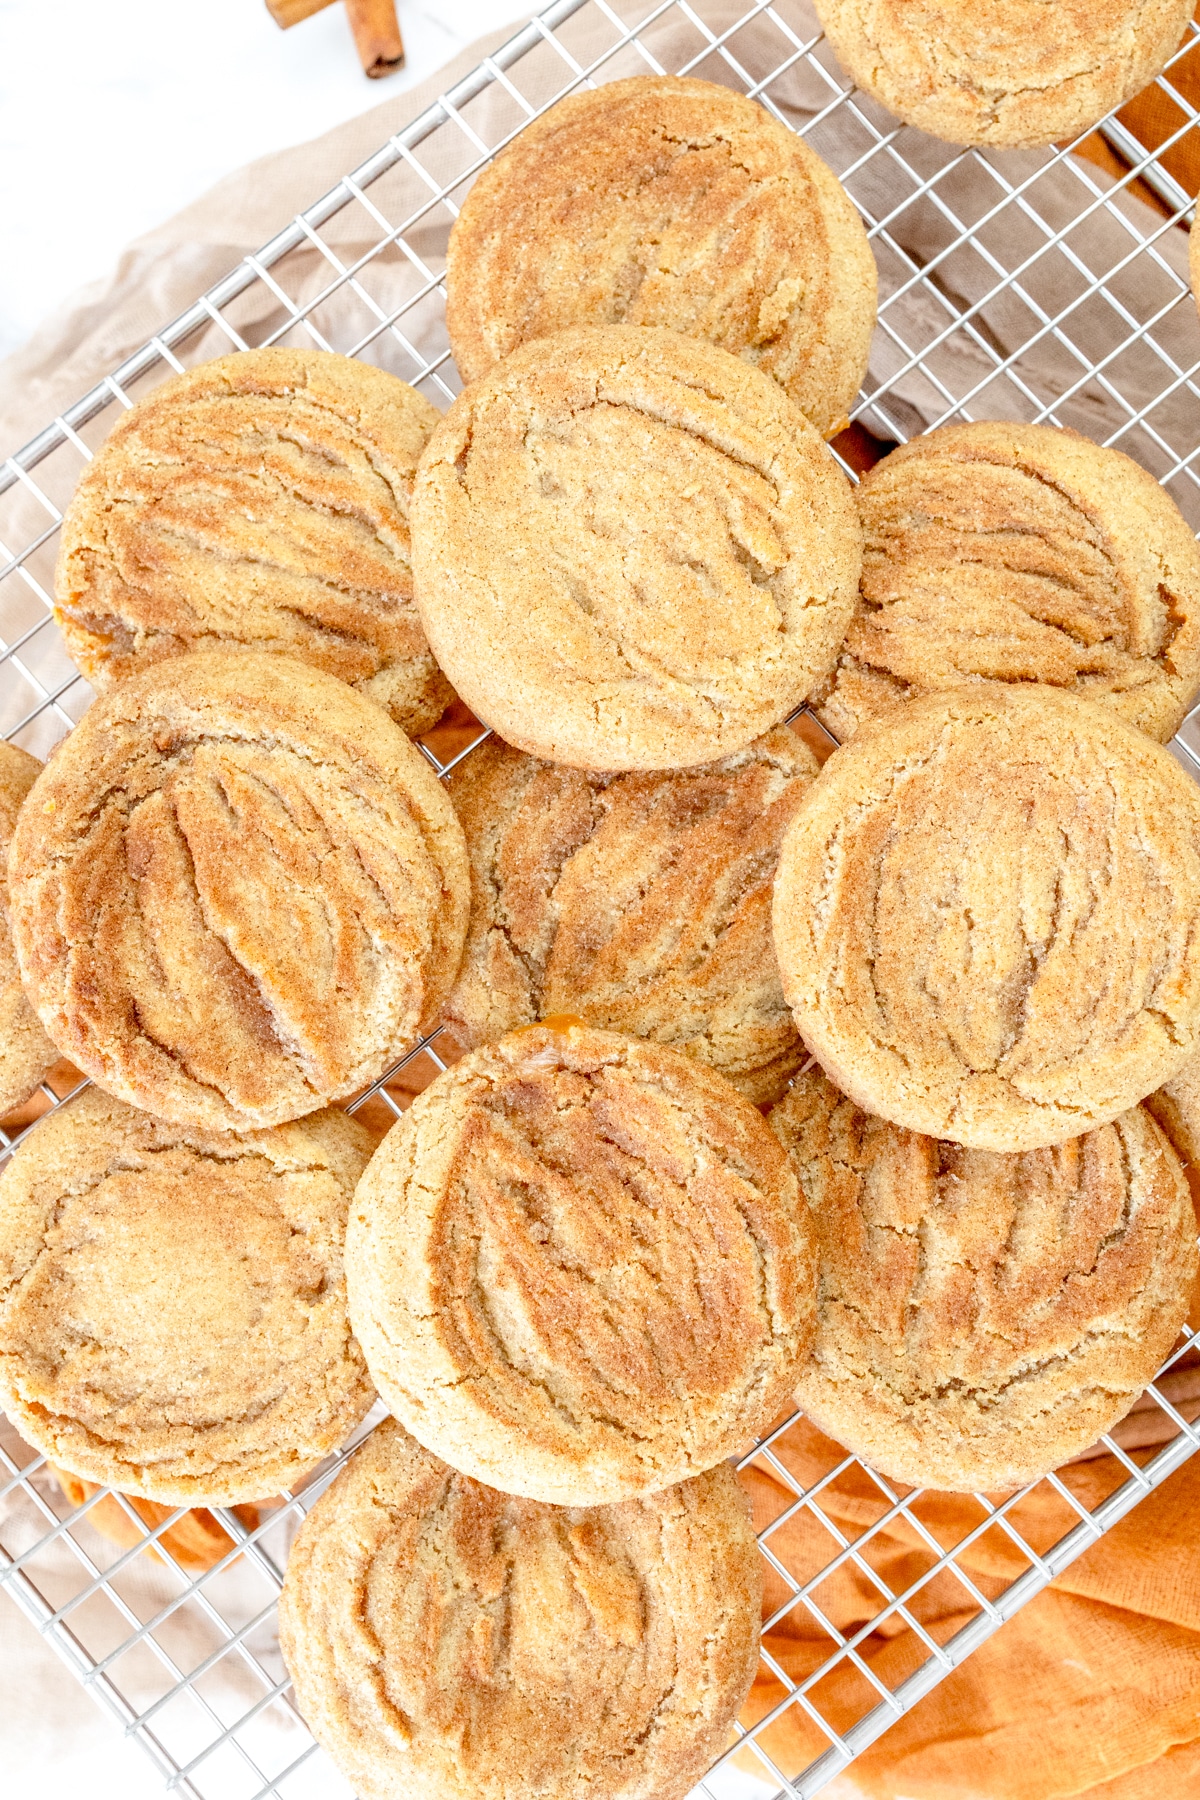 Top view of a pile of Caramel Snickerdoodle Cookies on a wire rack.